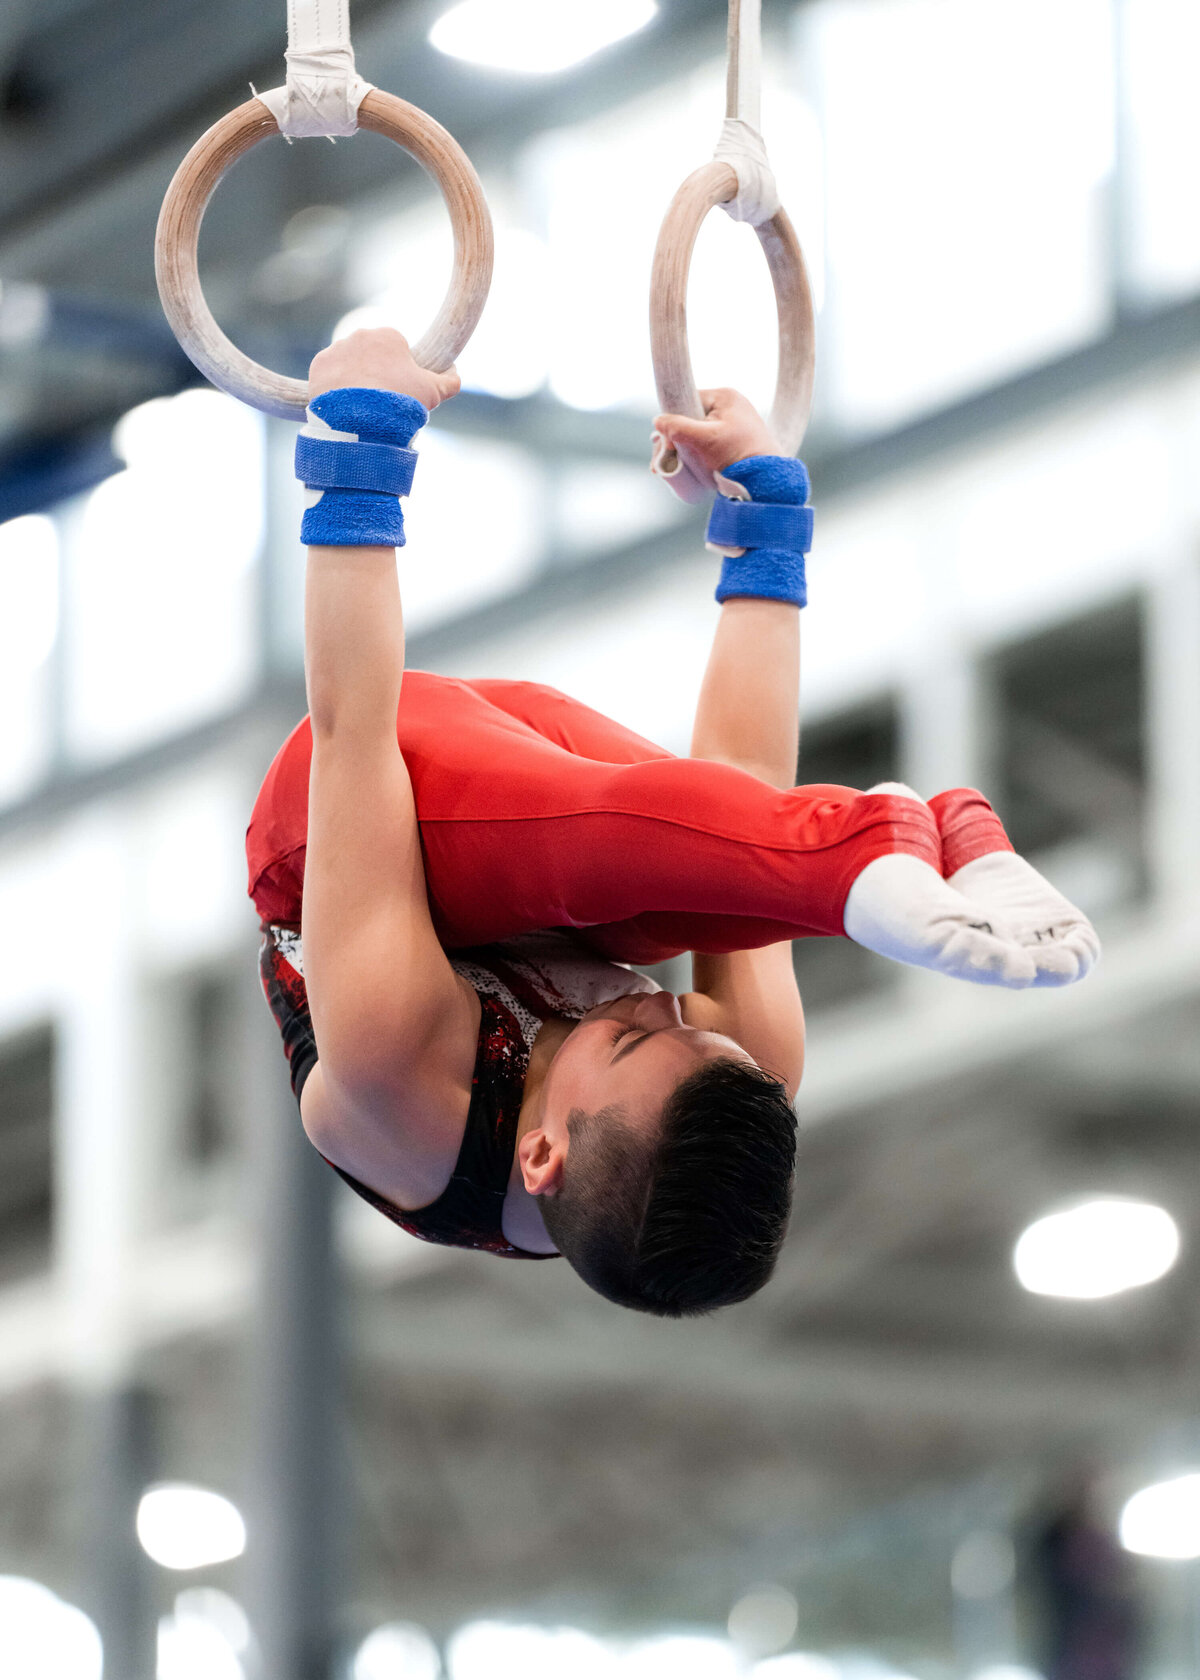 Photo by Luke O'Geil taken at the 2023 inaugural Grizzly Classic men's artistic gymnastics competitionA1_09876